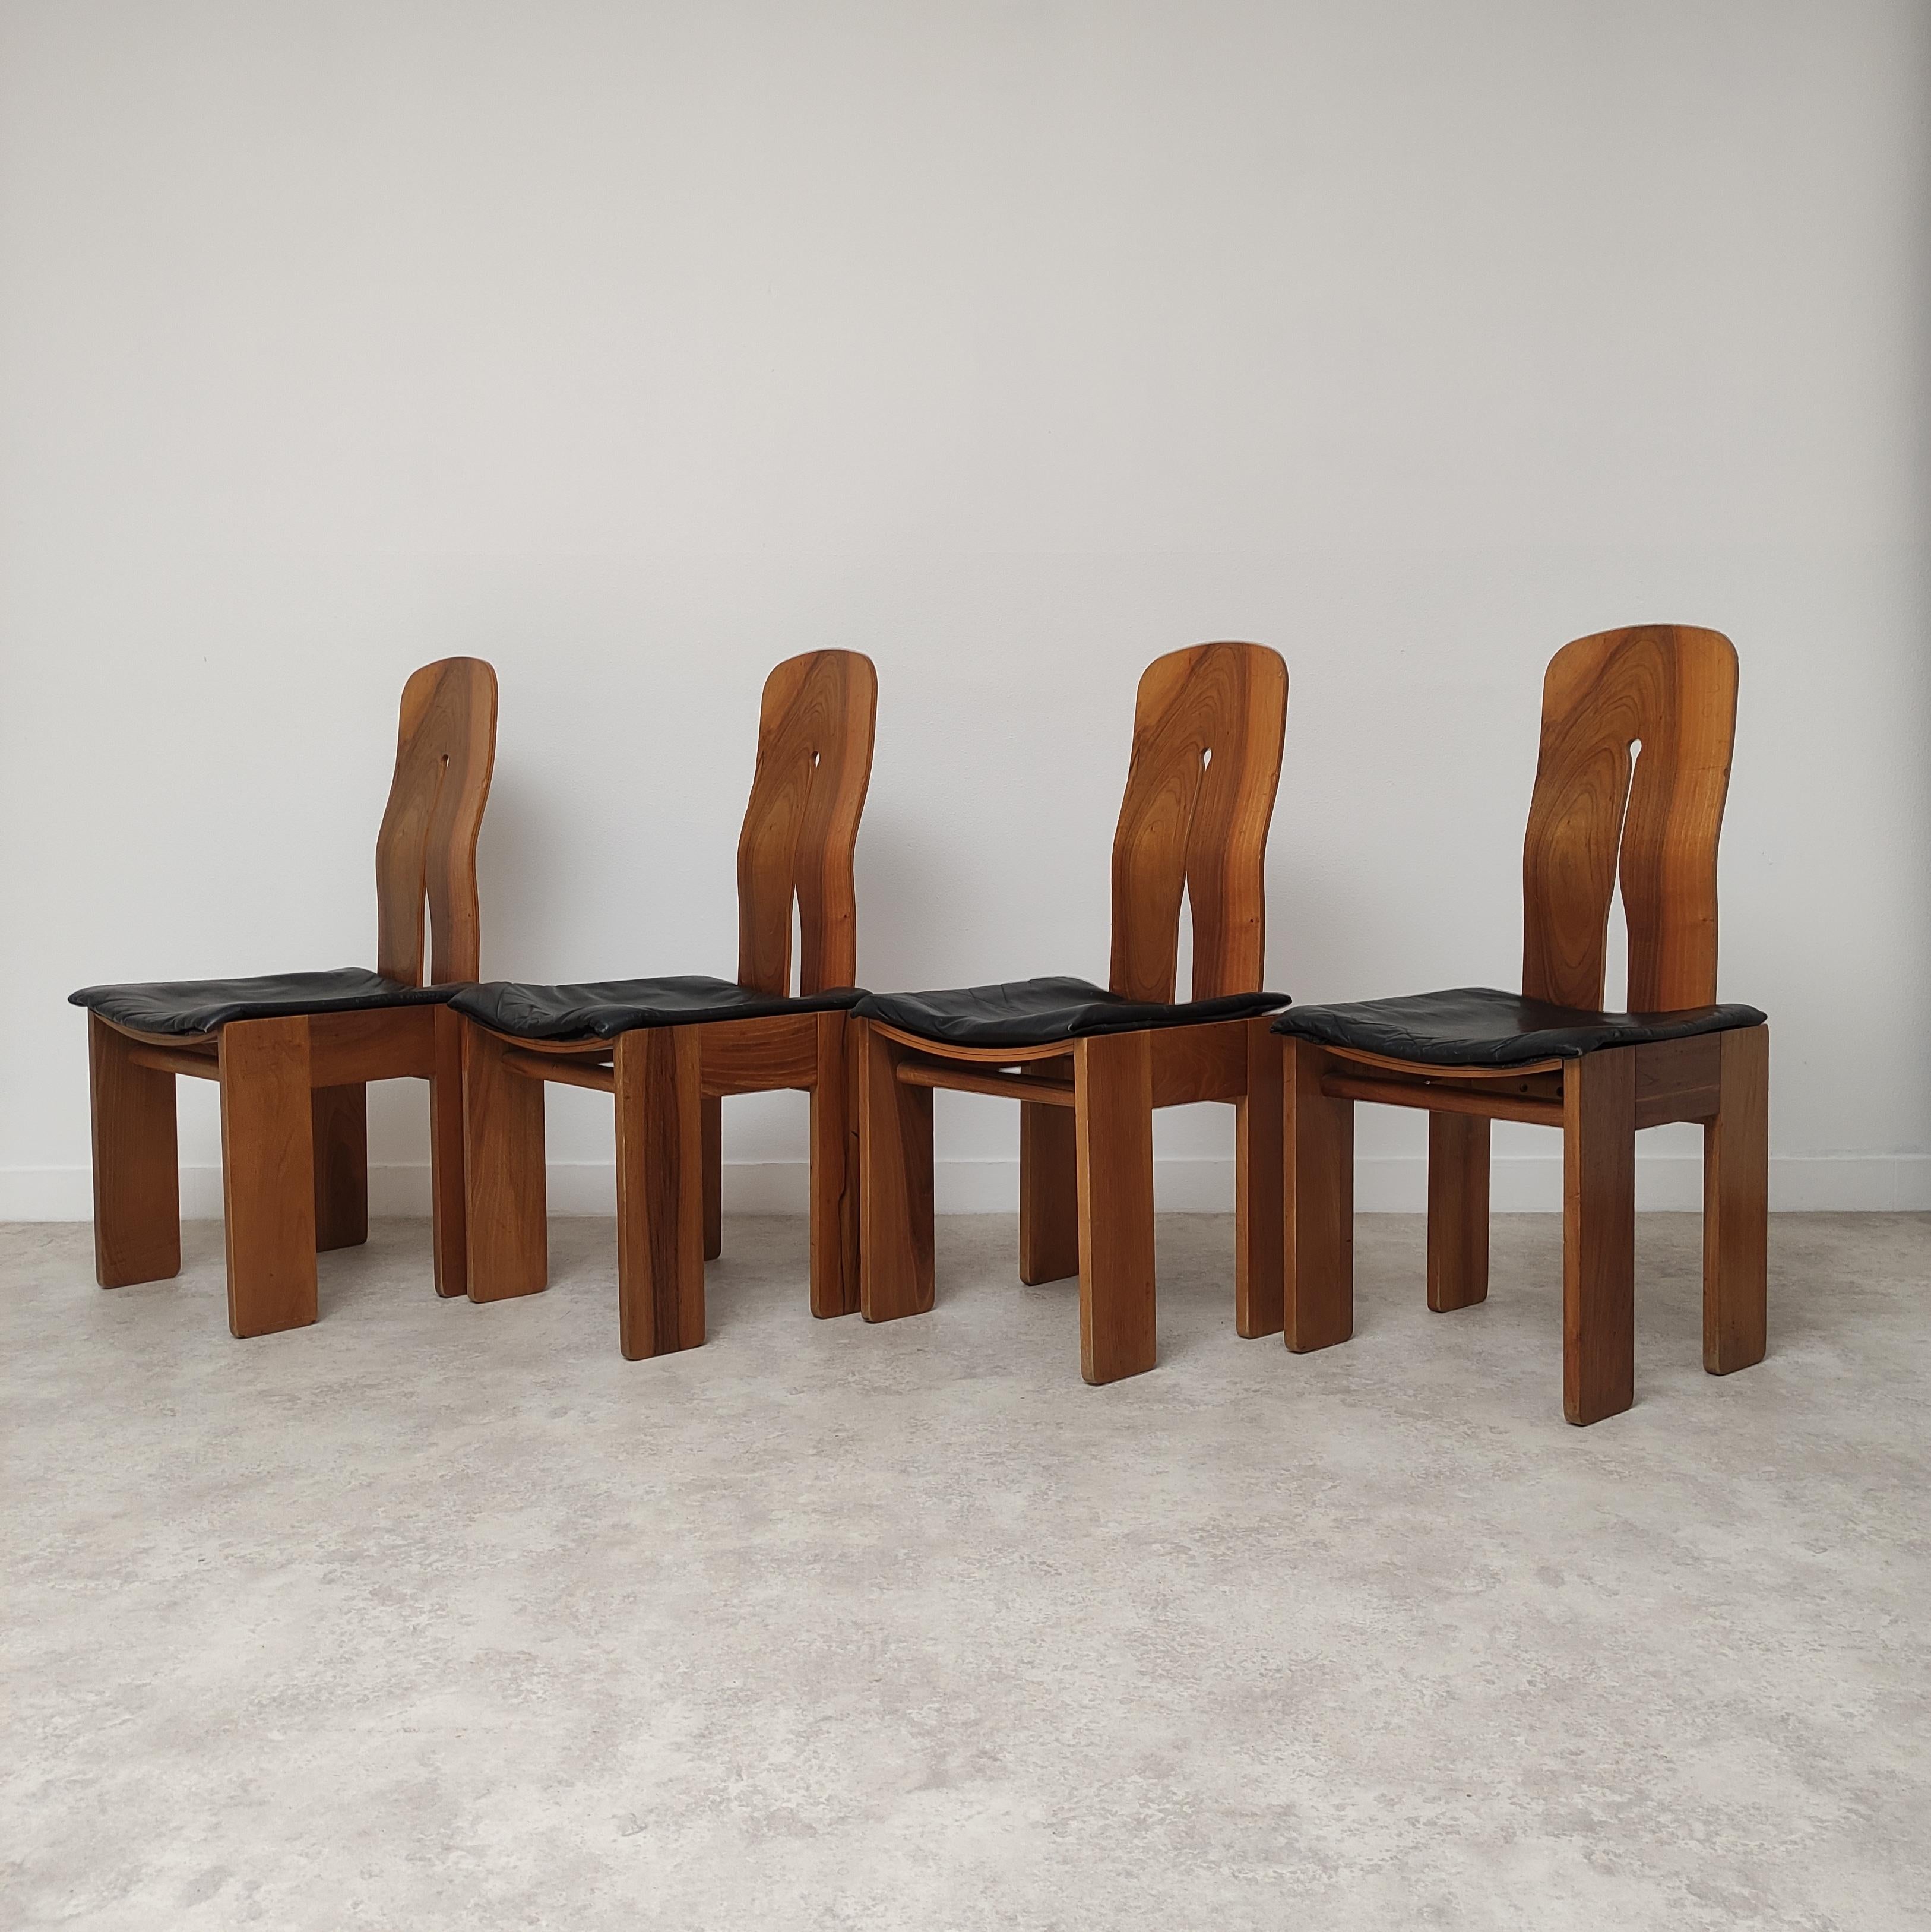 This Is a rare iconic set of 4 chairs design by Carlo Scarpa for Bernini, mod 1934-765.
This chairs Born in 1970, and come up in original condition, without any restoration as in photo, with his awesome walnuts wood.
This sculptural chair Is perfect